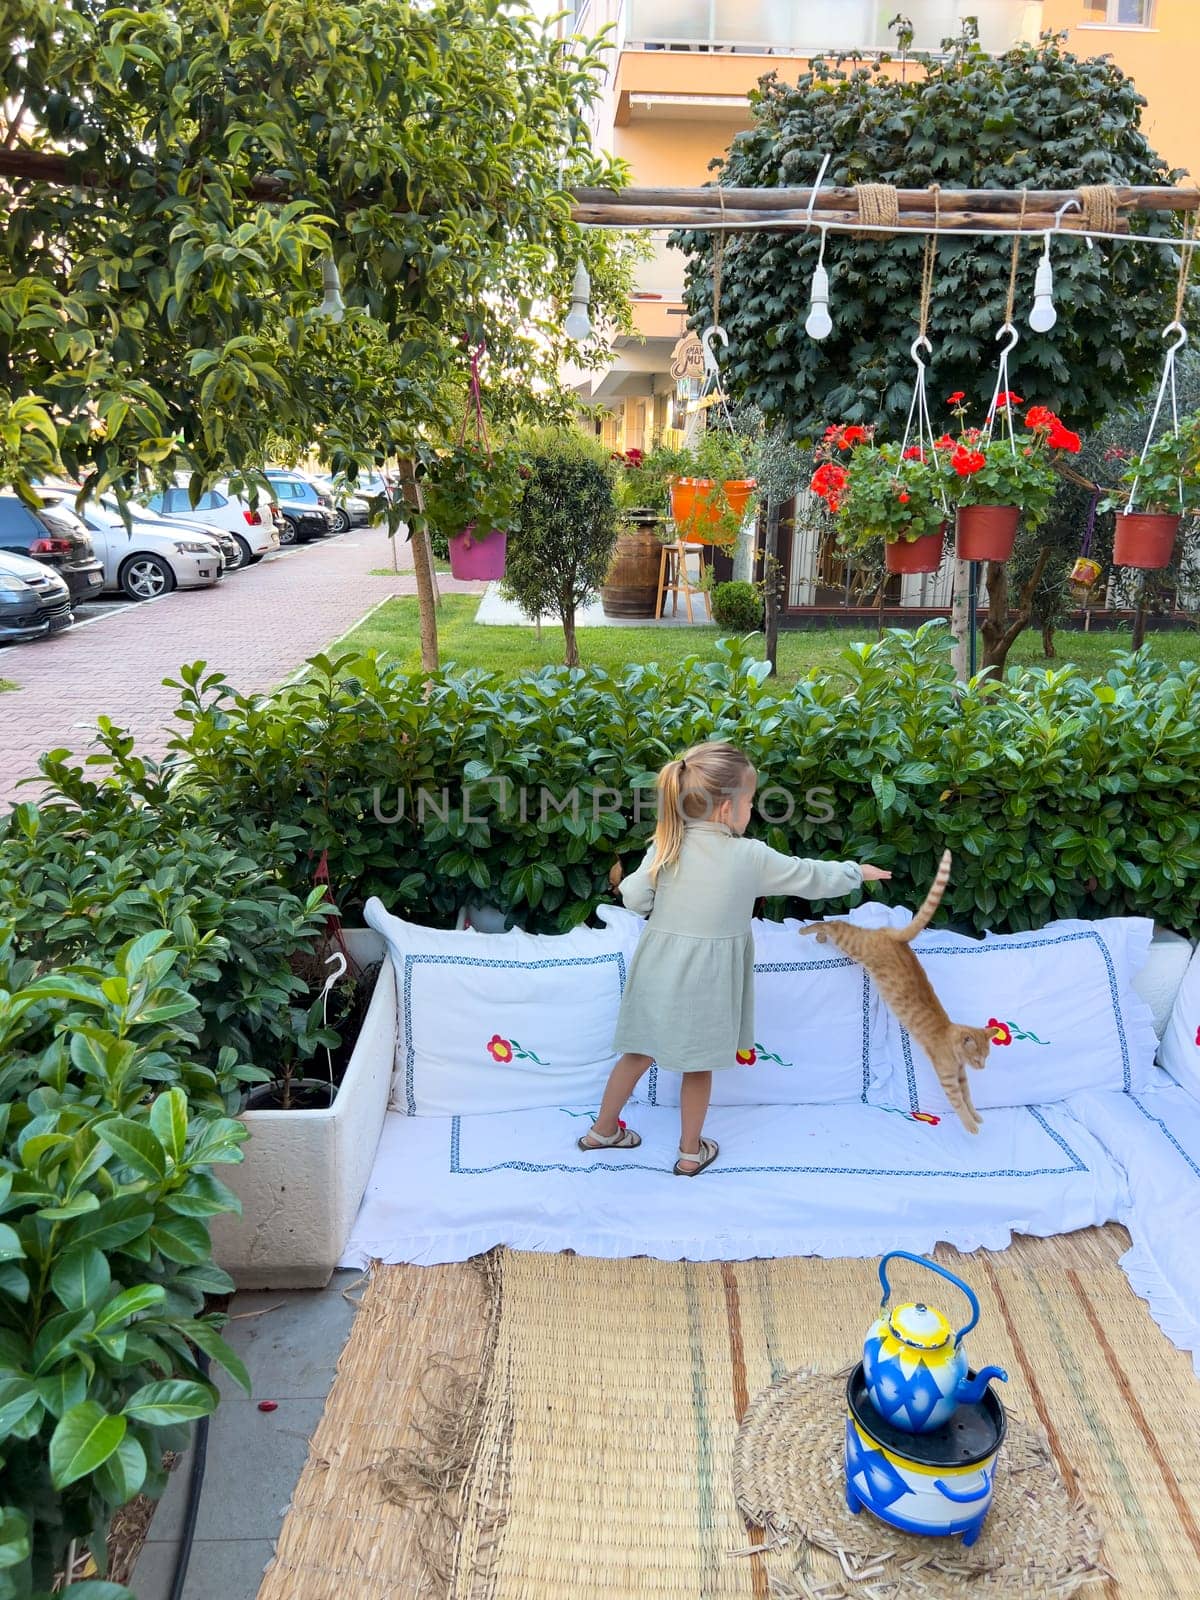 Little girl trying to pet a ginger cat jumping on a mat in the garden by Nadtochiy